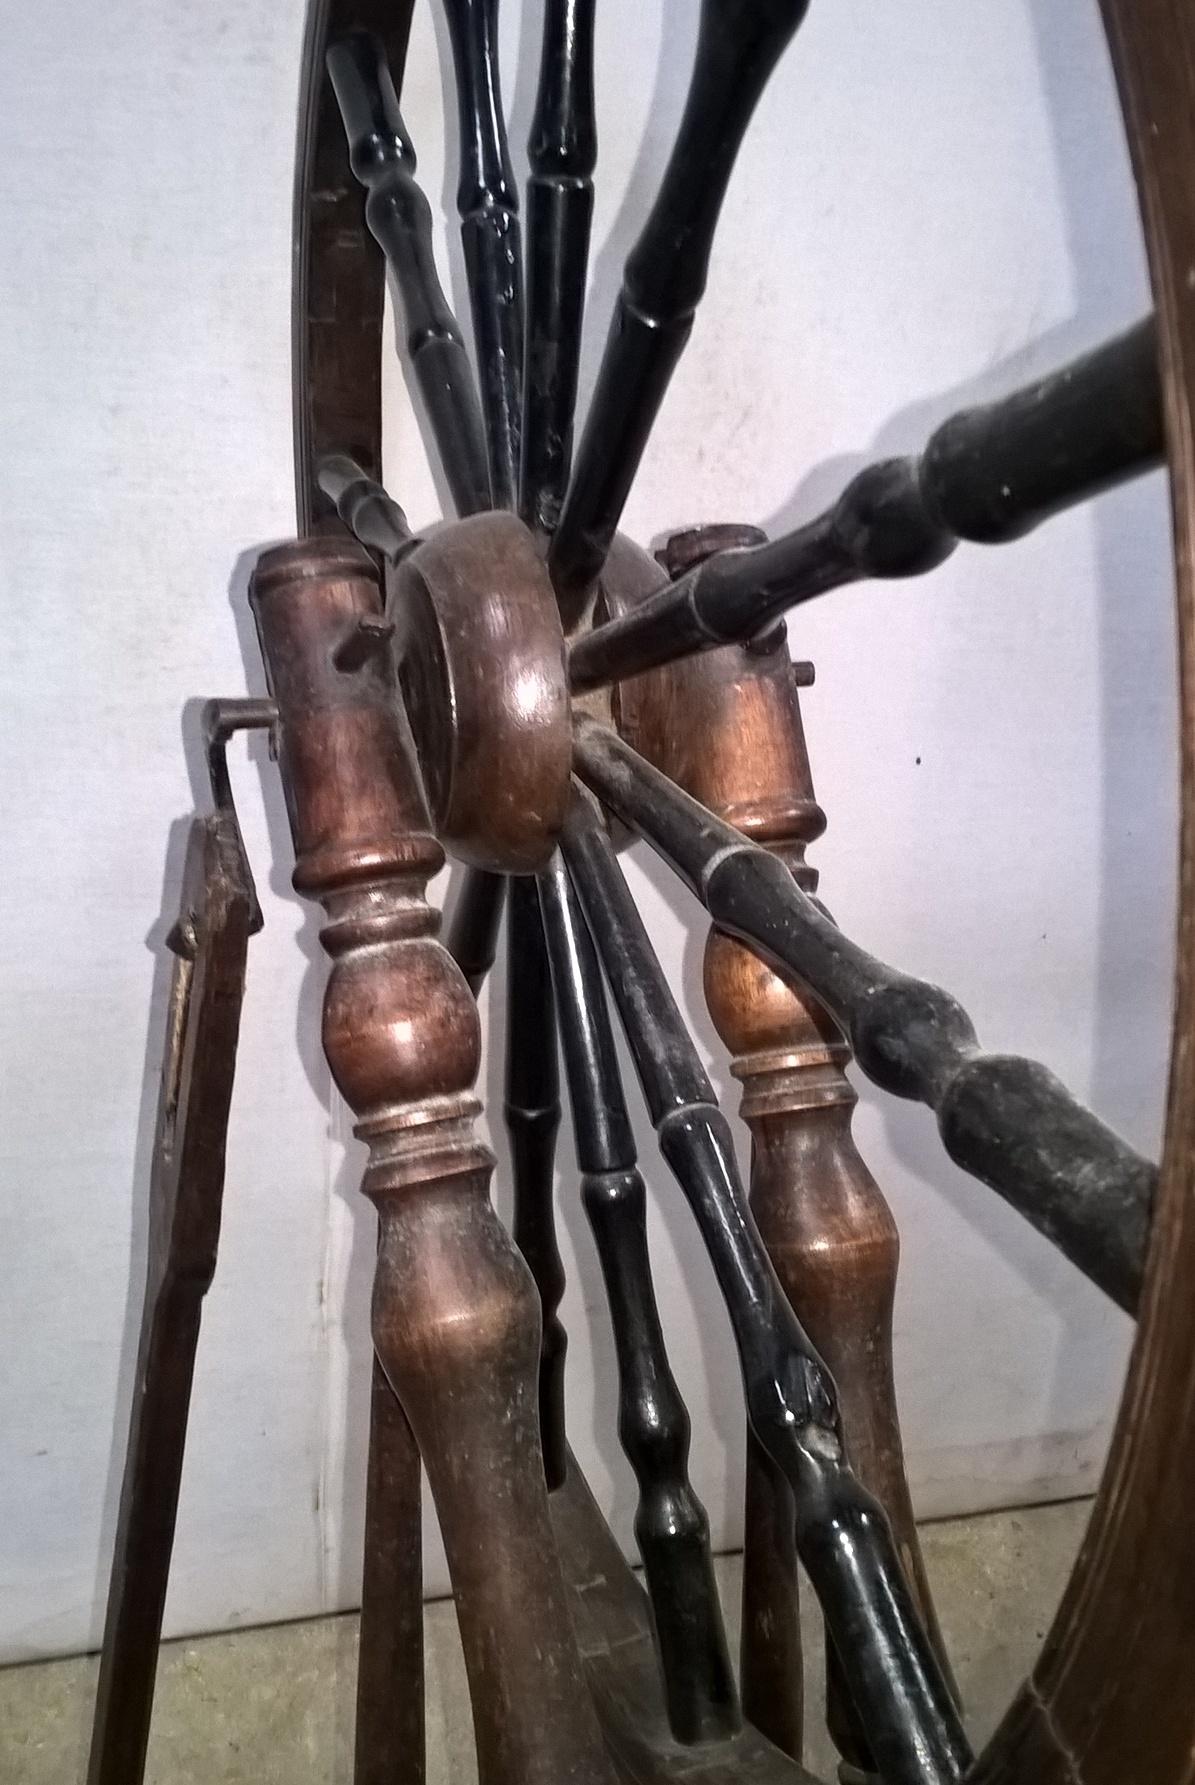 An early 19th century fruitwood treadle spinning wheel with turned spindles and supports.
In working order.